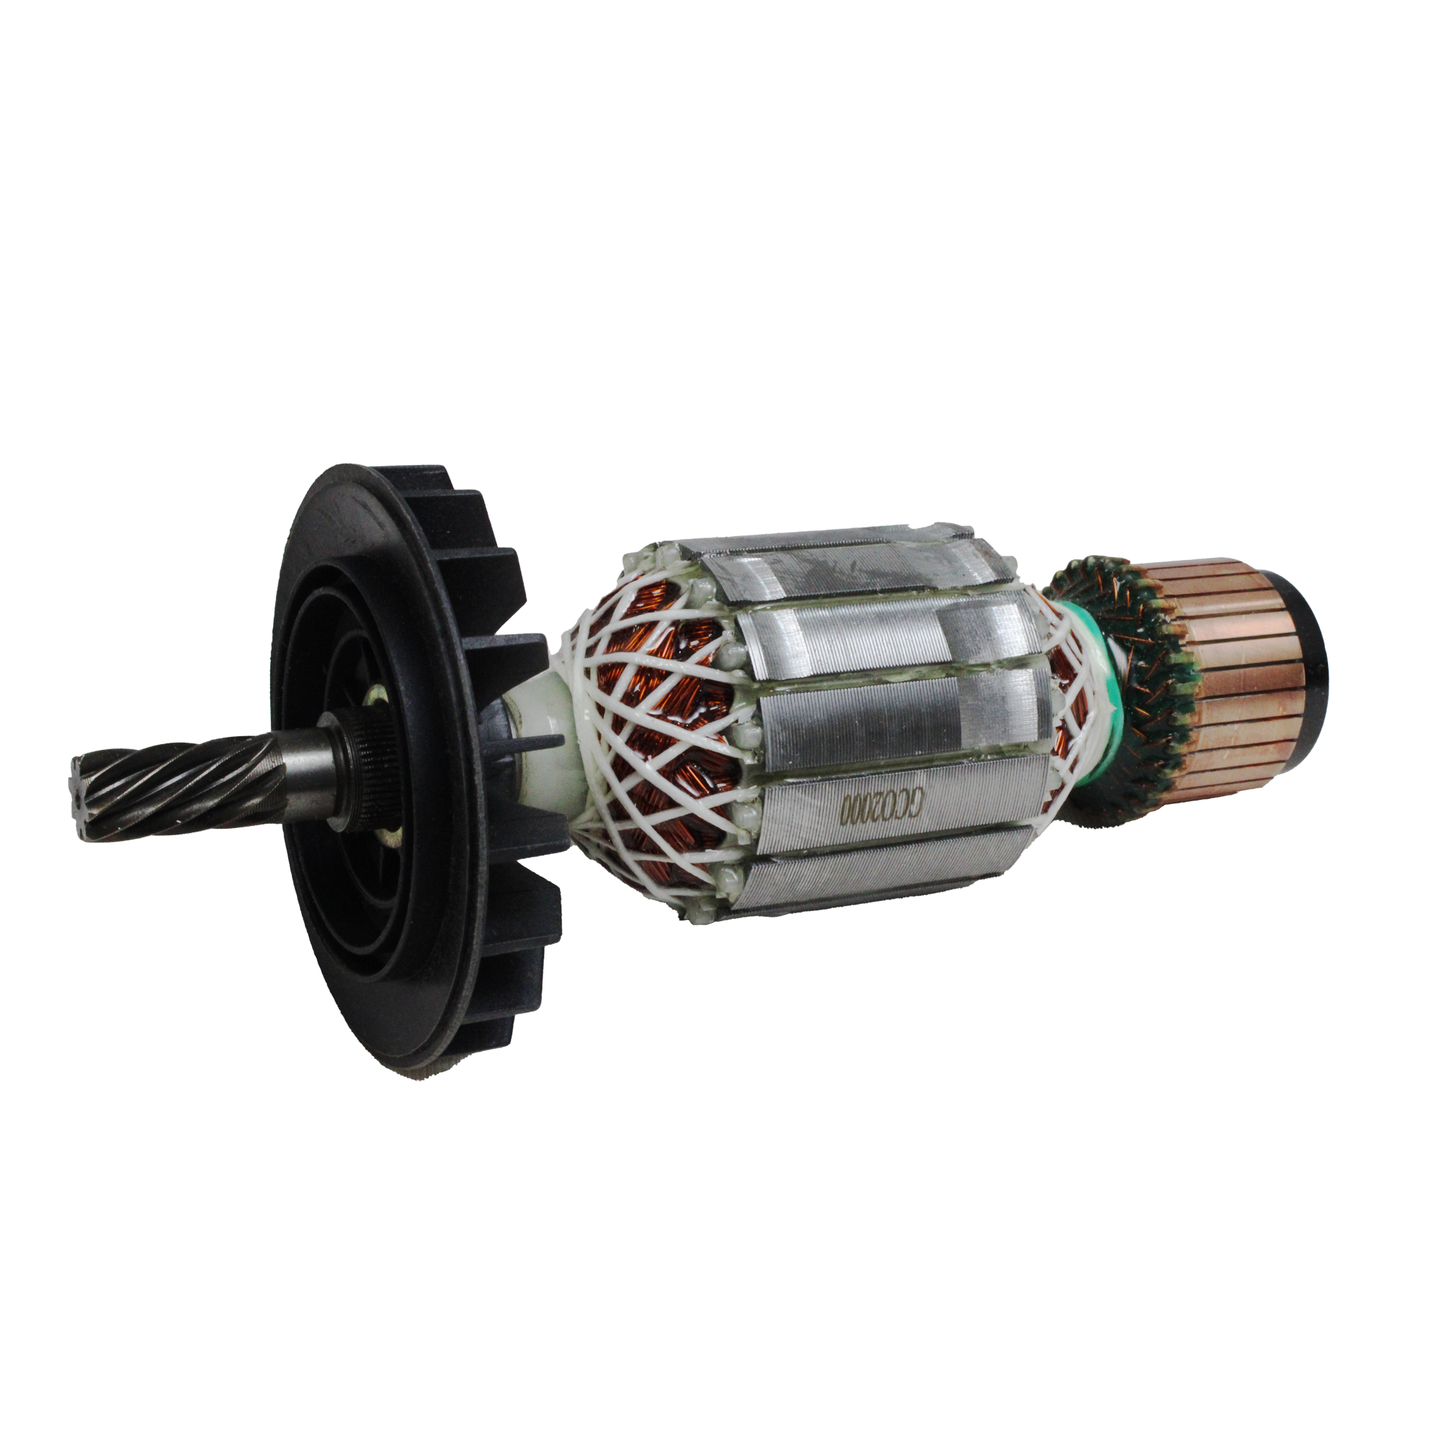 AEGON ACWFGC02000 Copper Armature - Compatible with Bosch GCO2000 Chopsaw and Similar Models of Other Brands